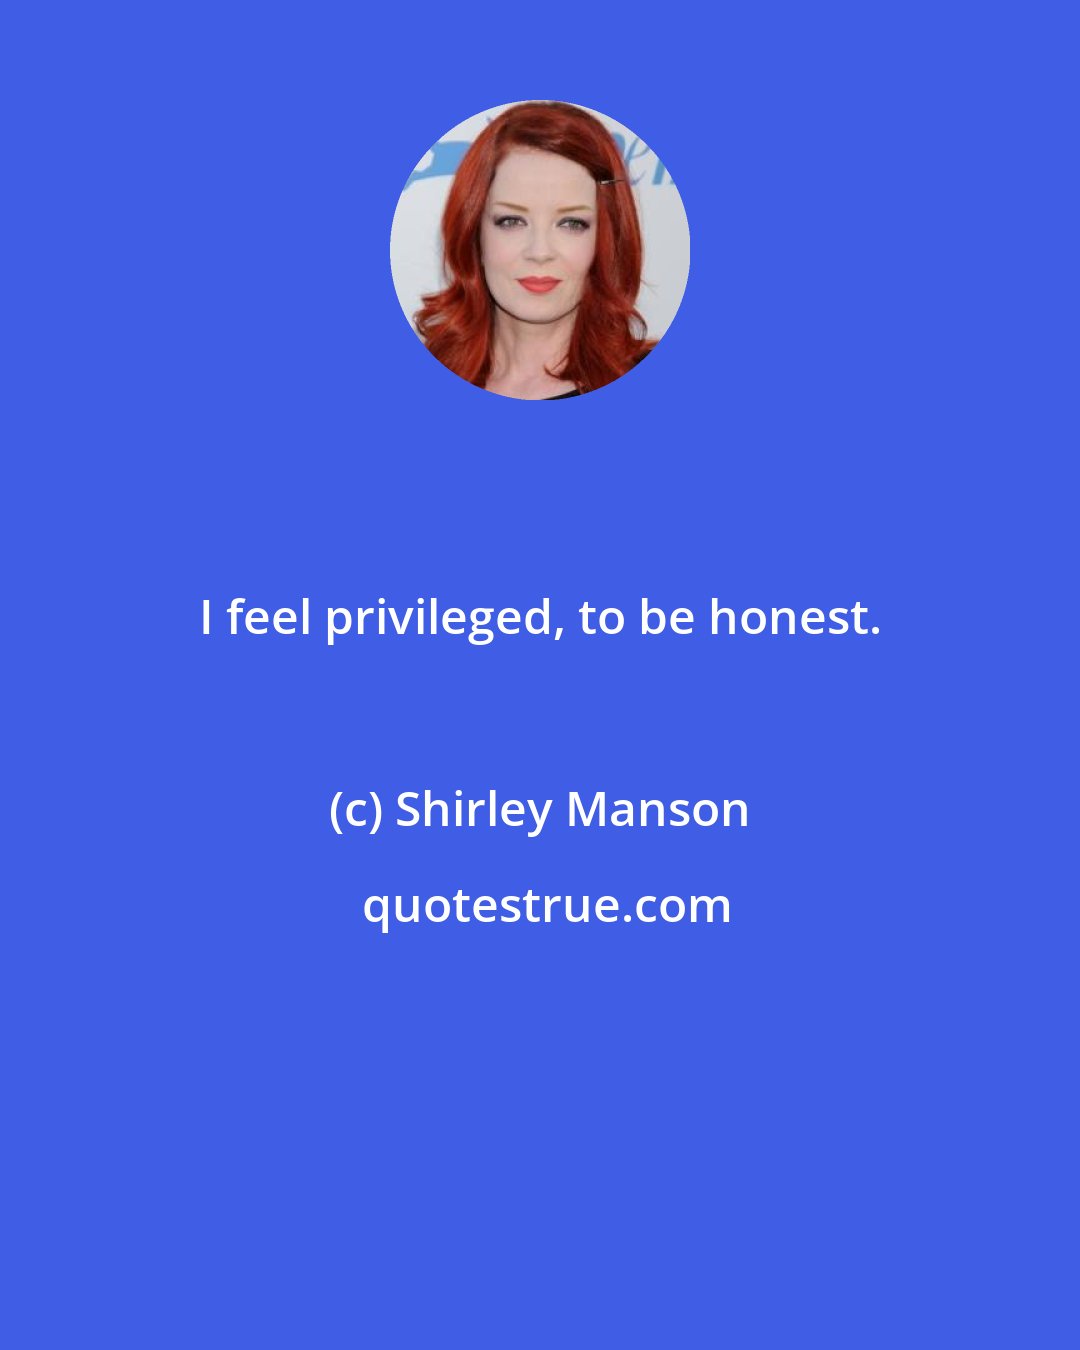 Shirley Manson: I feel privileged, to be honest.